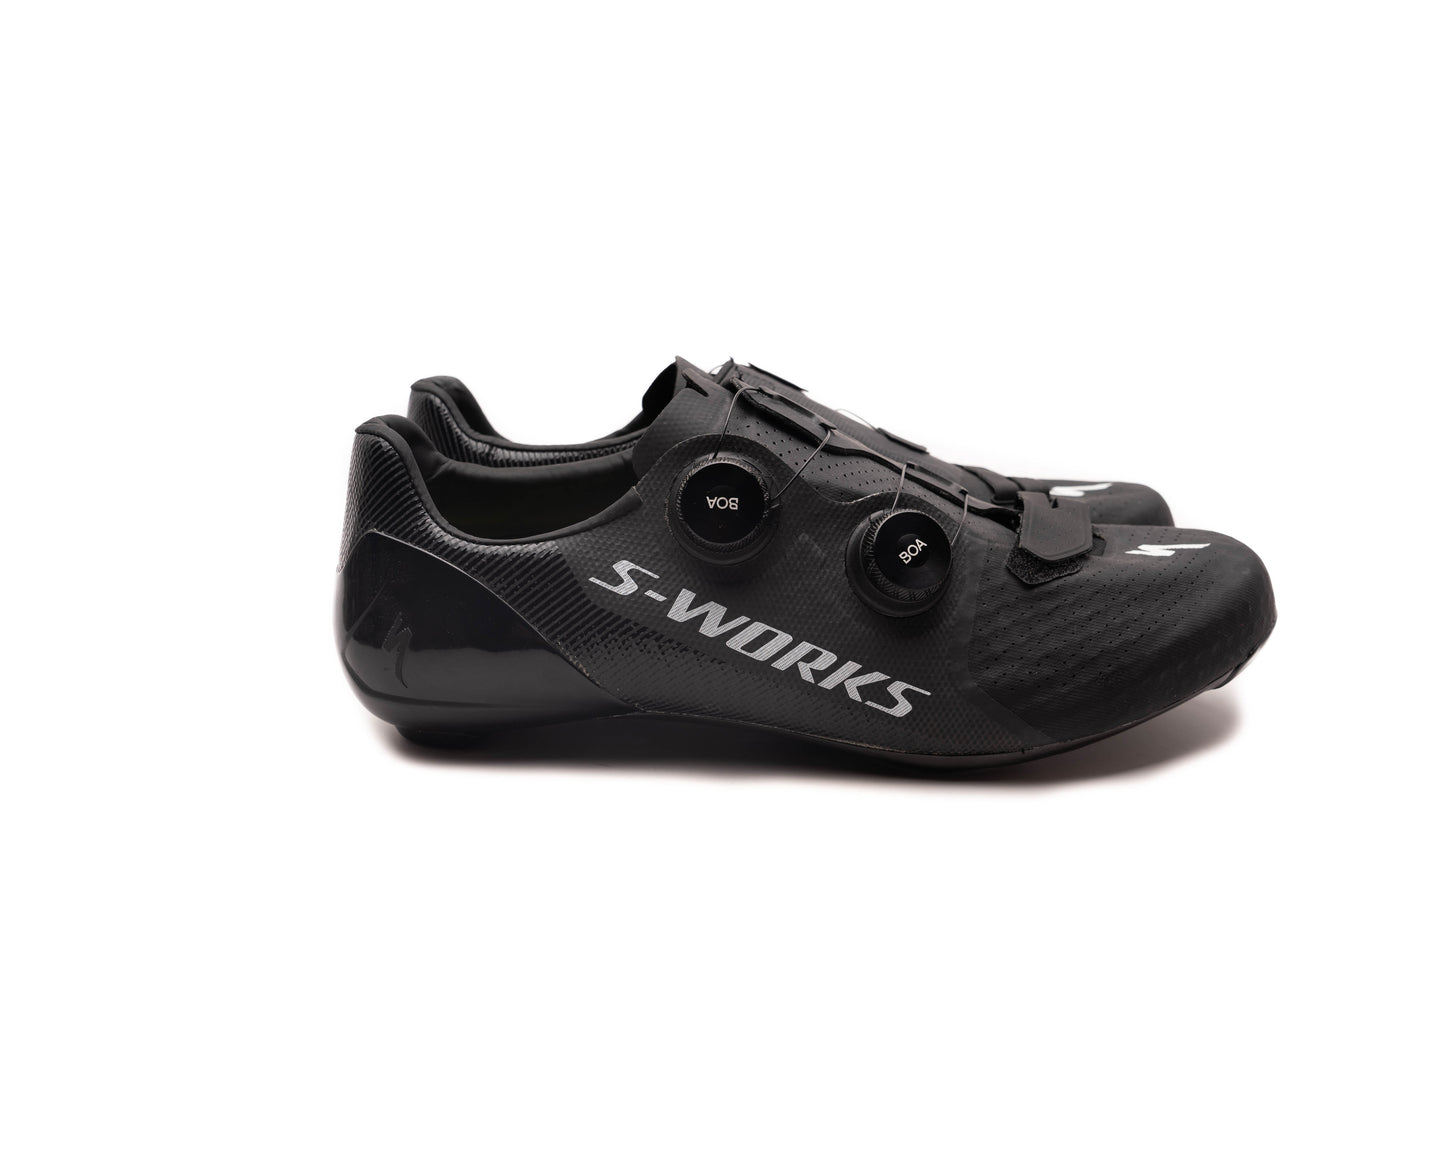 Specialized S-Works 7 Road Shoe Blk Wide 46.5 (New Other)